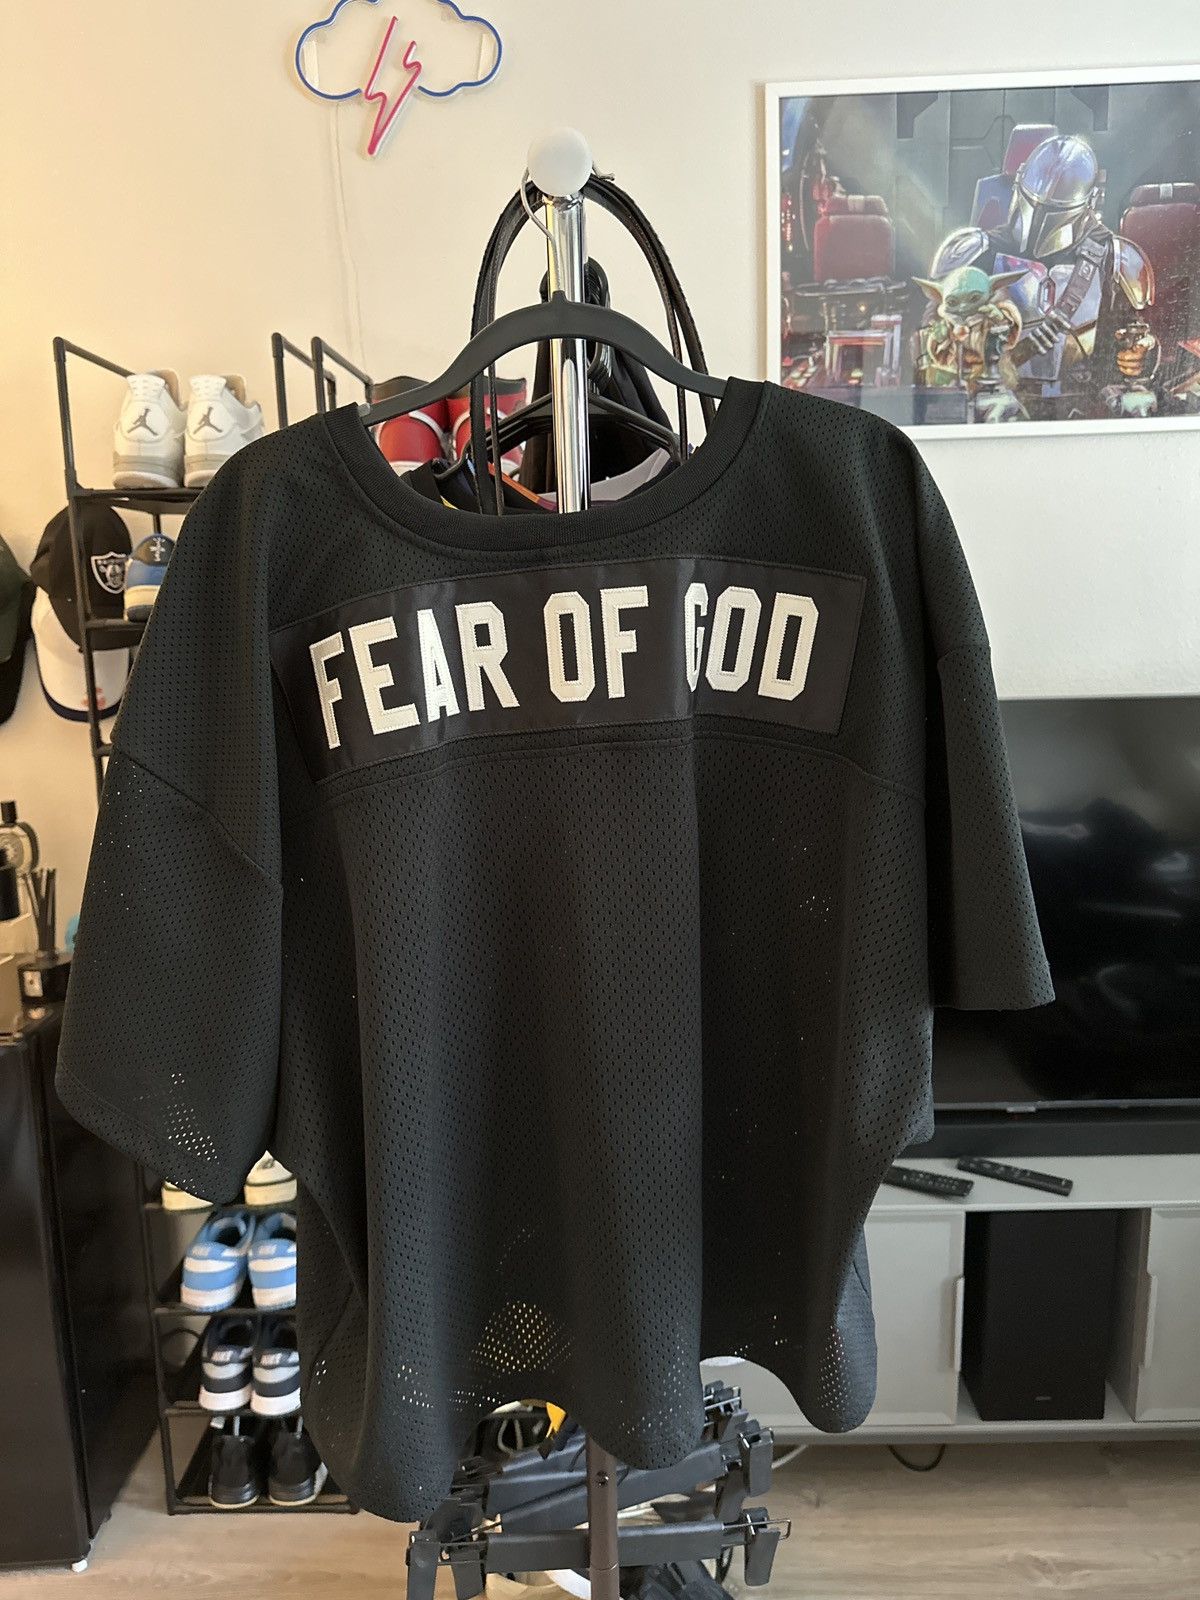 Fear of God Fear of God Fifth Collection Jersey | Grailed